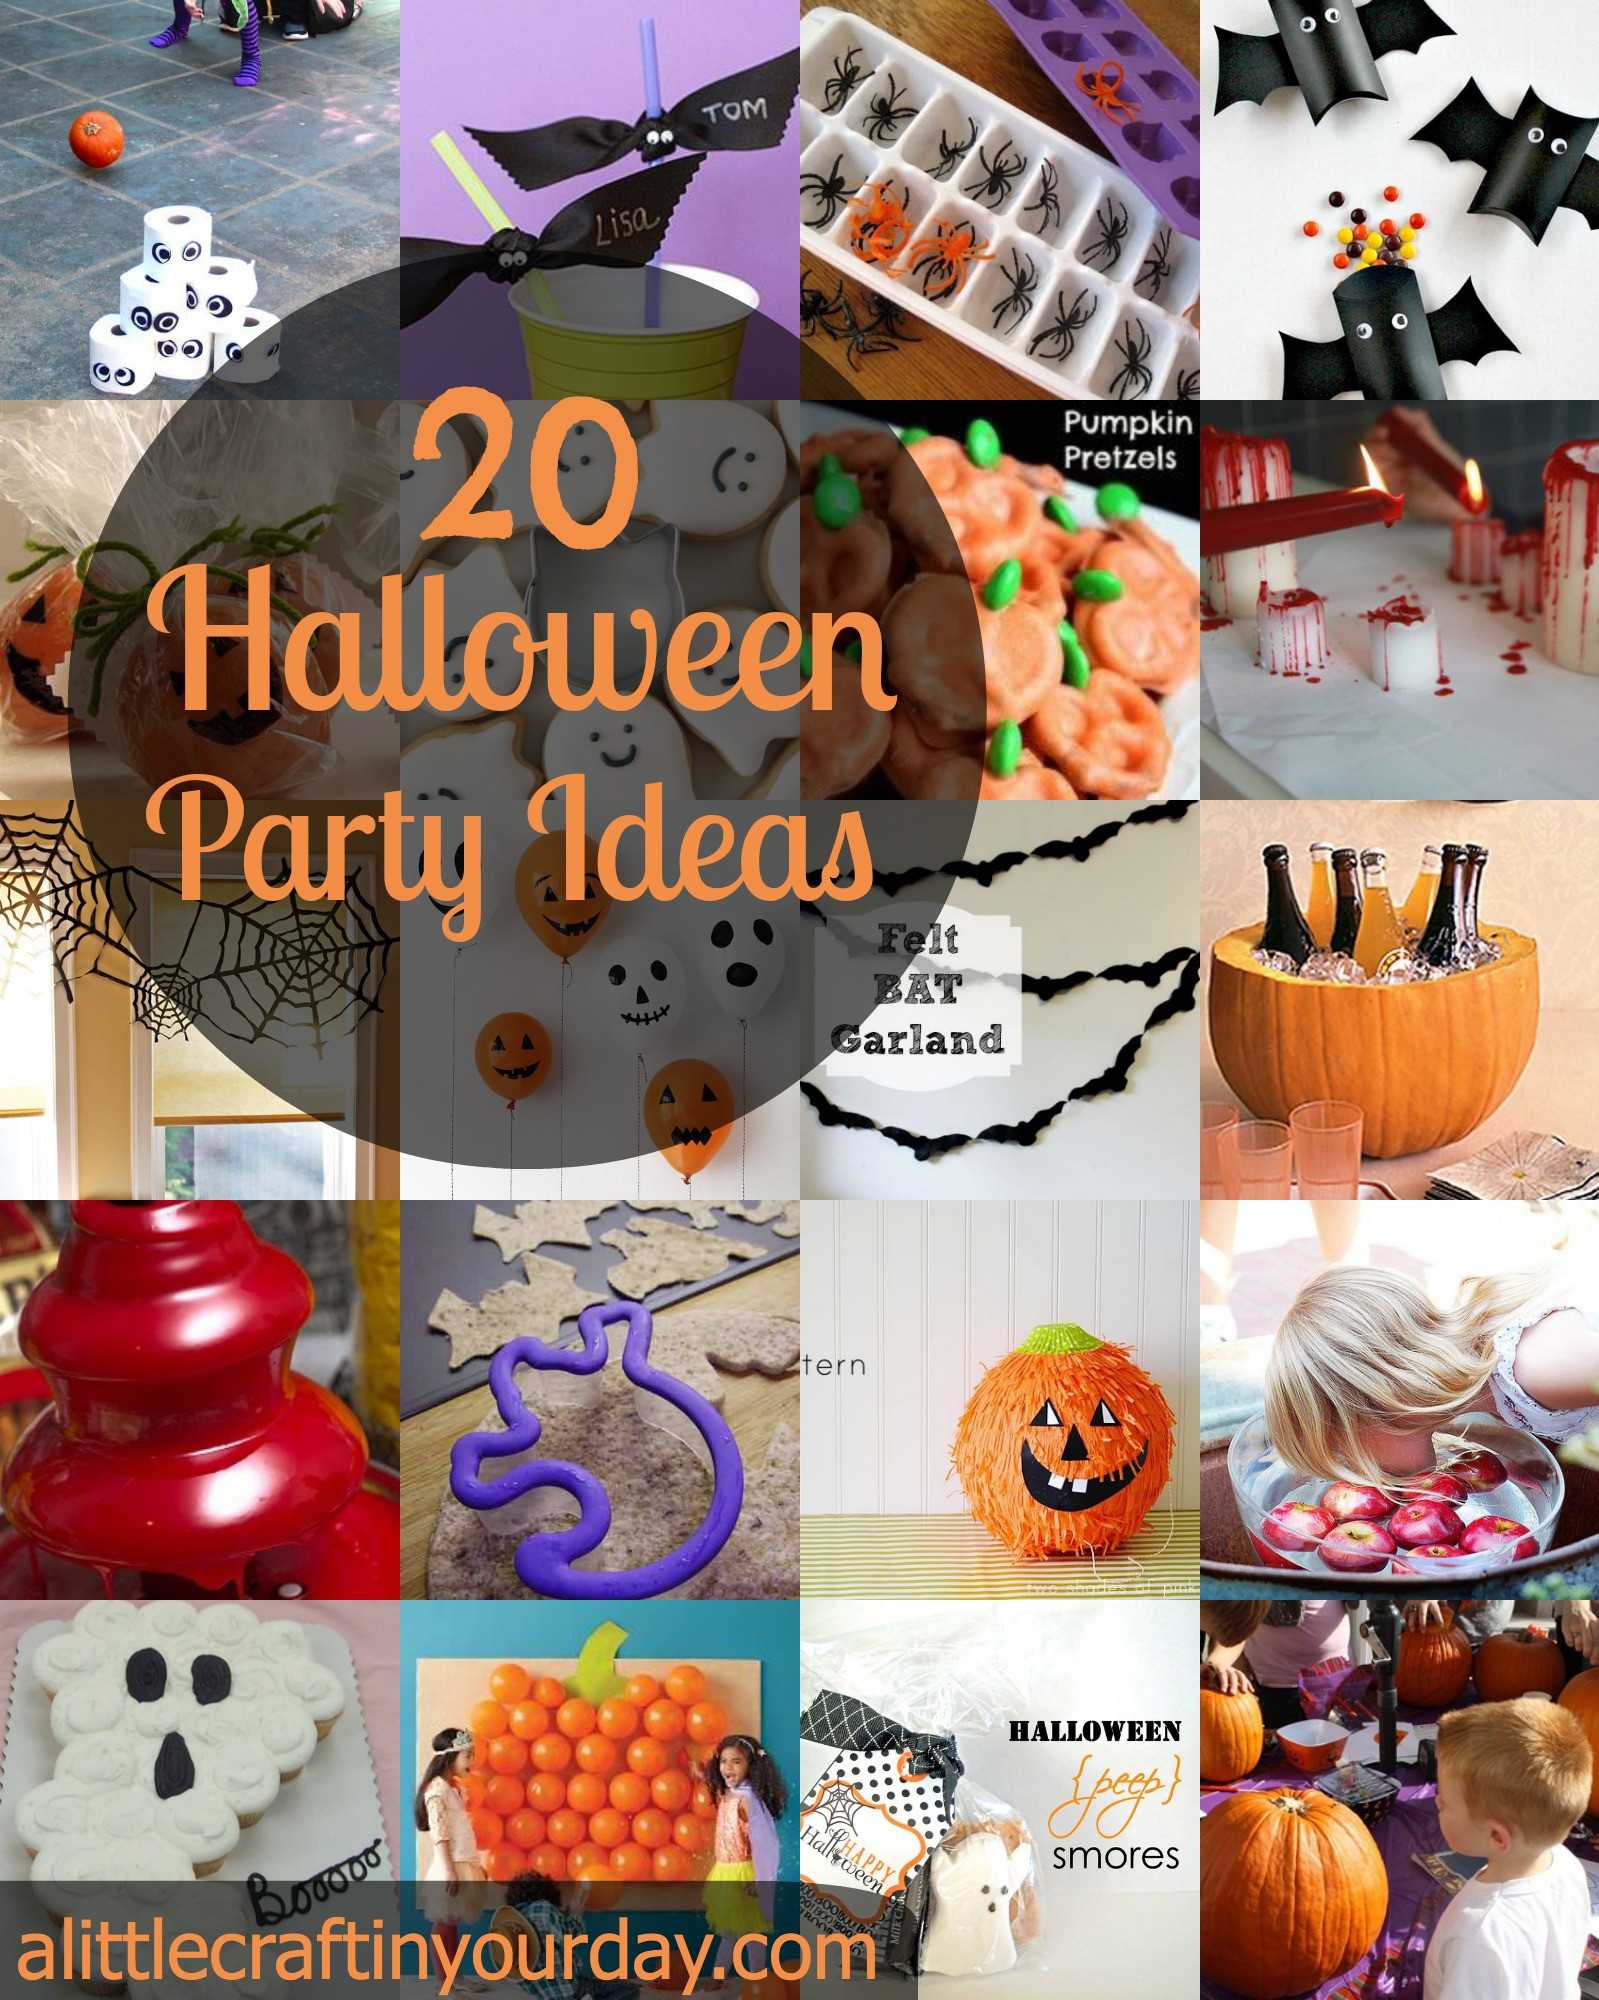 Halloween Party Activity Ideas
 21 Halloween Party Ideas A Little Craft In Your Day